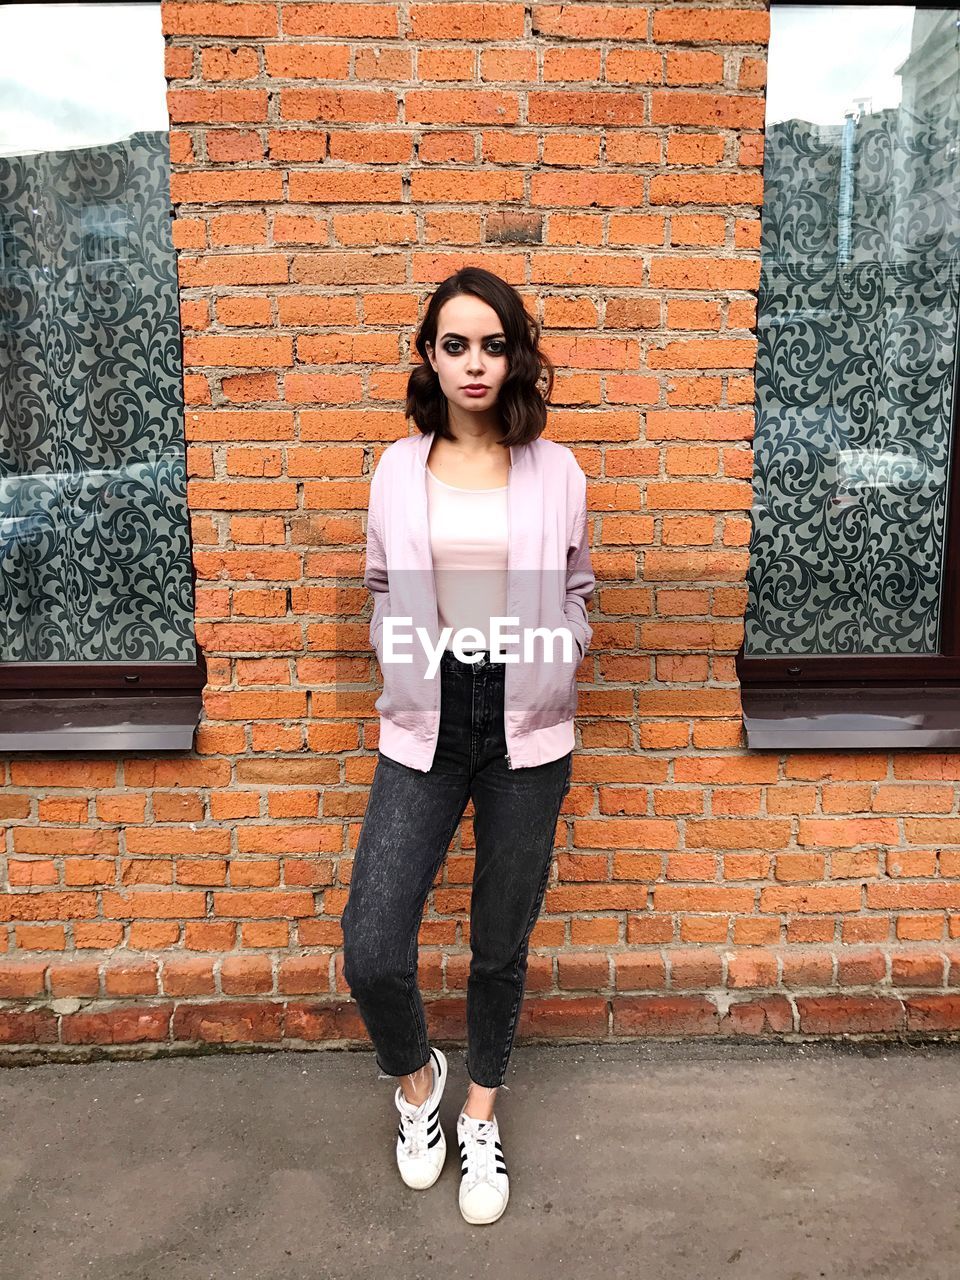 PORTRAIT OF YOUNG WOMAN STANDING ON BRICK WALL